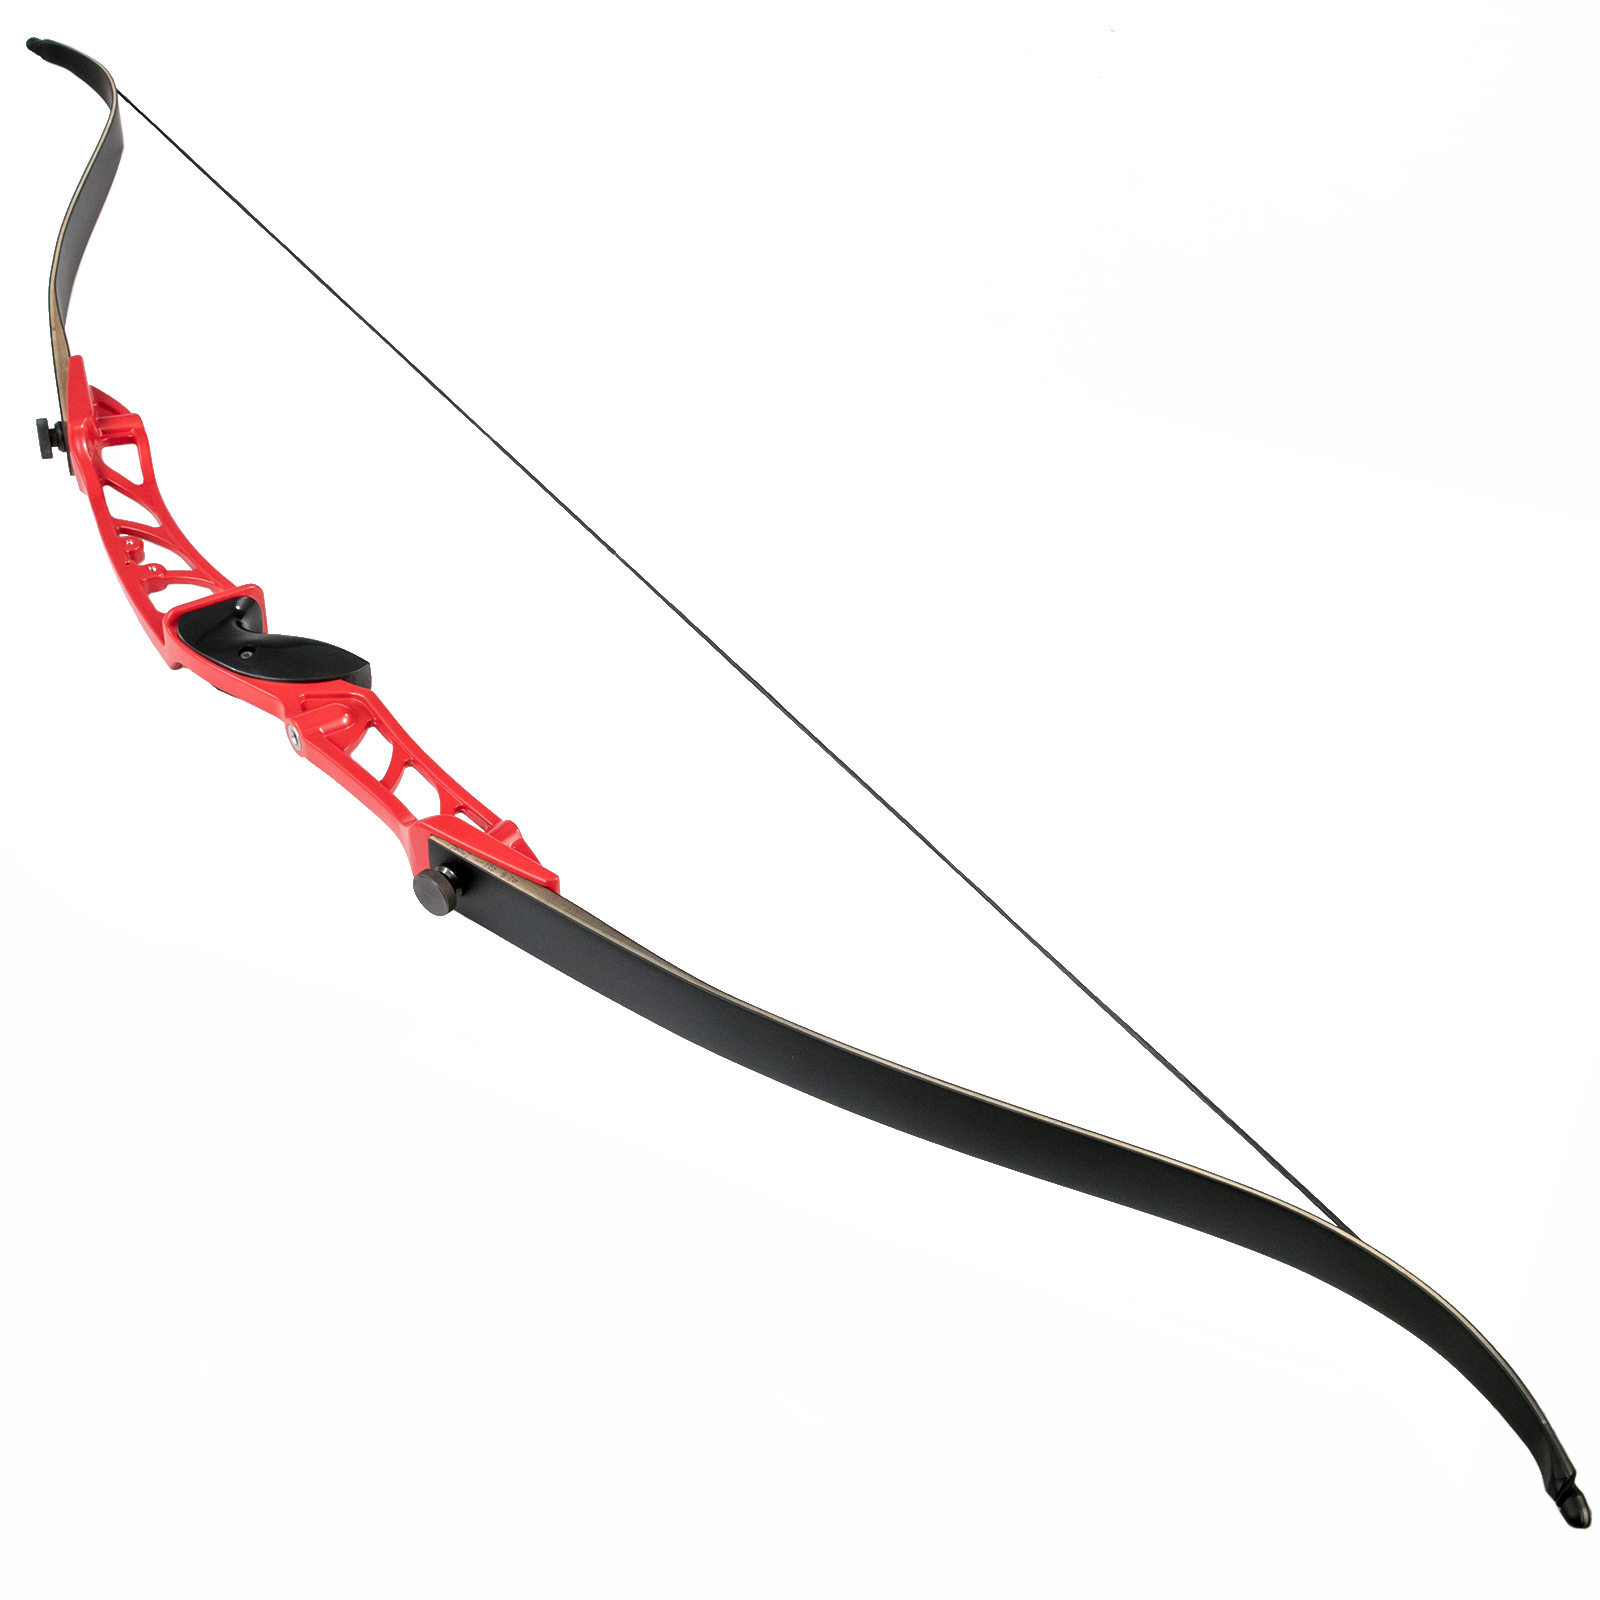 Takedown Recurve BowSet 24LBS Archery BowArrow Adults Youth Shooting Practice от Vevor Many GEOs